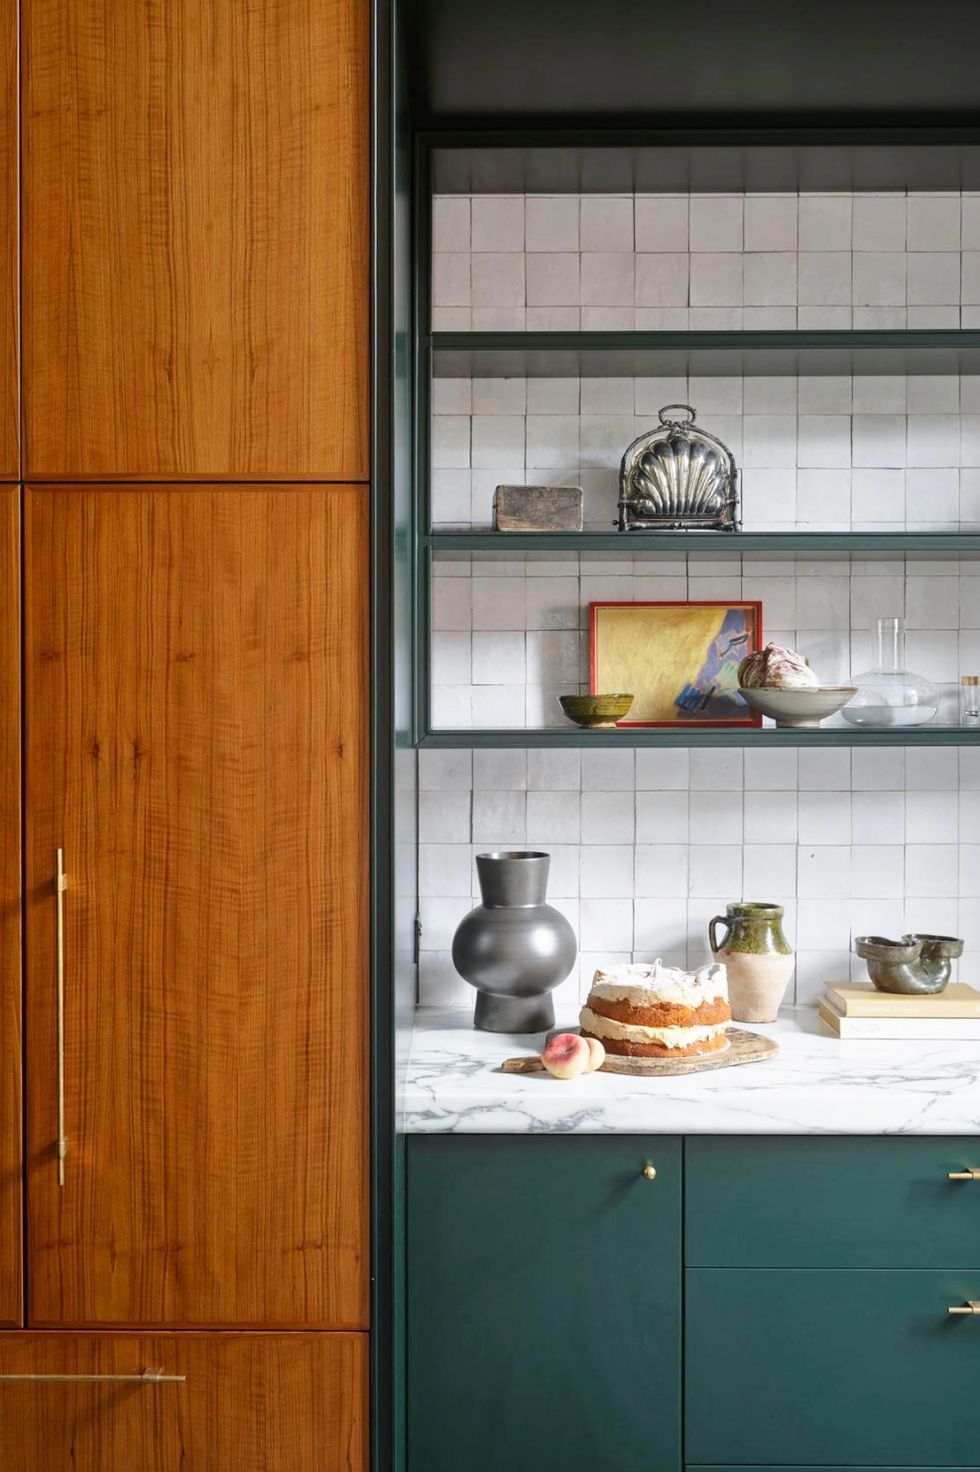 18 Examples of Two-Toned Kitchen Cabinets From Designers